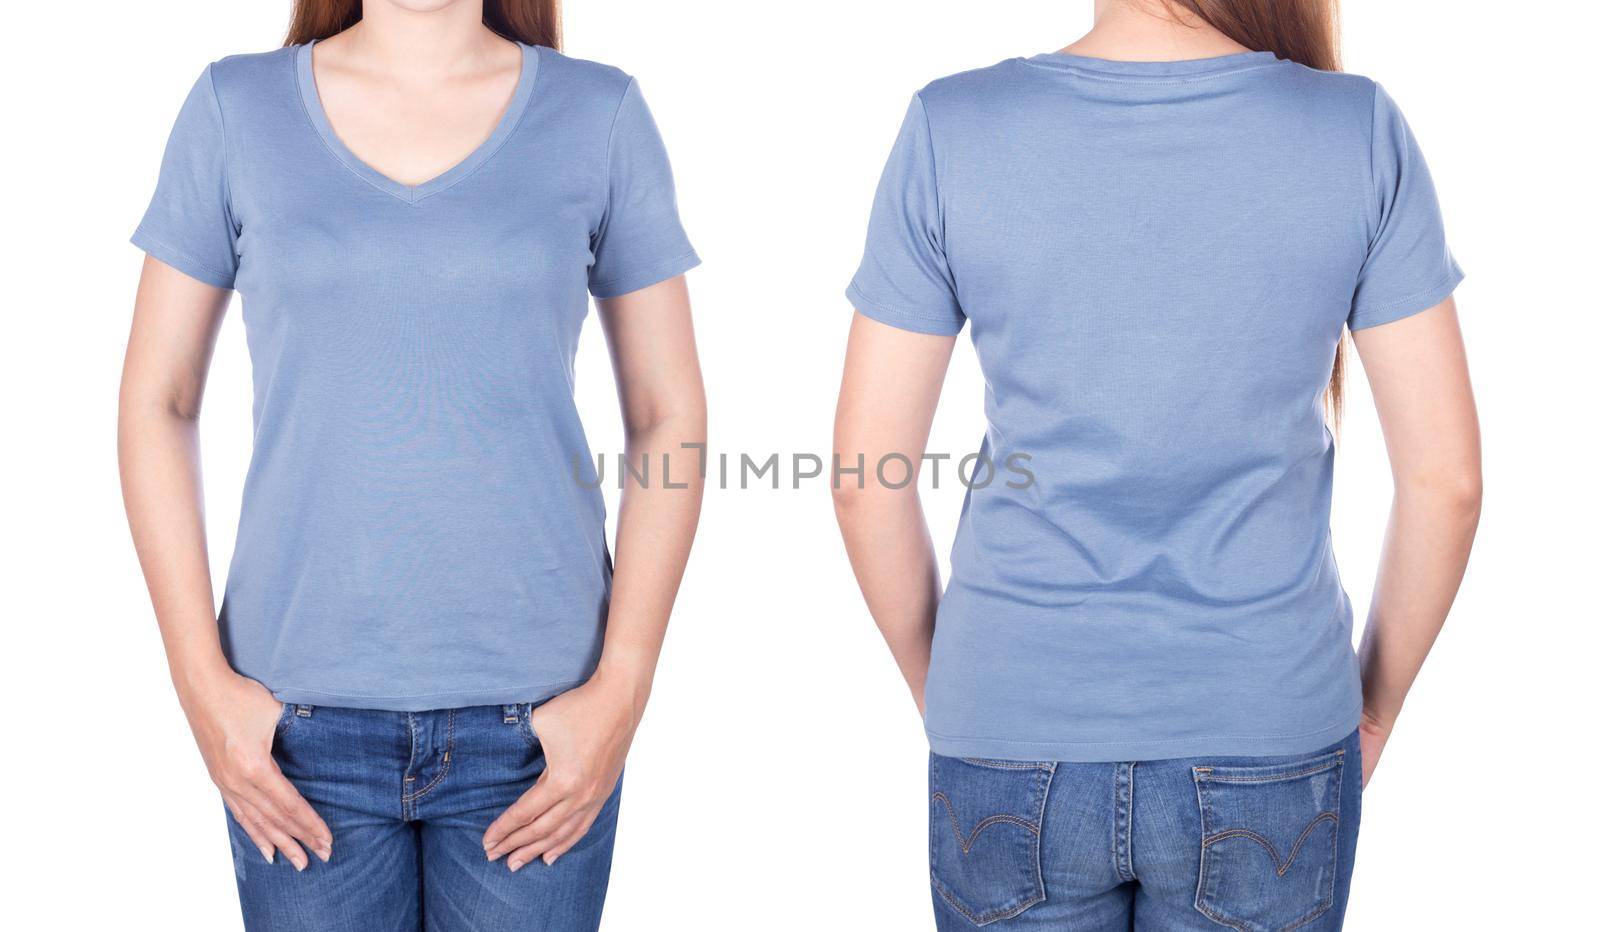 woman in blue t-shirt isolated on white background by geargodz